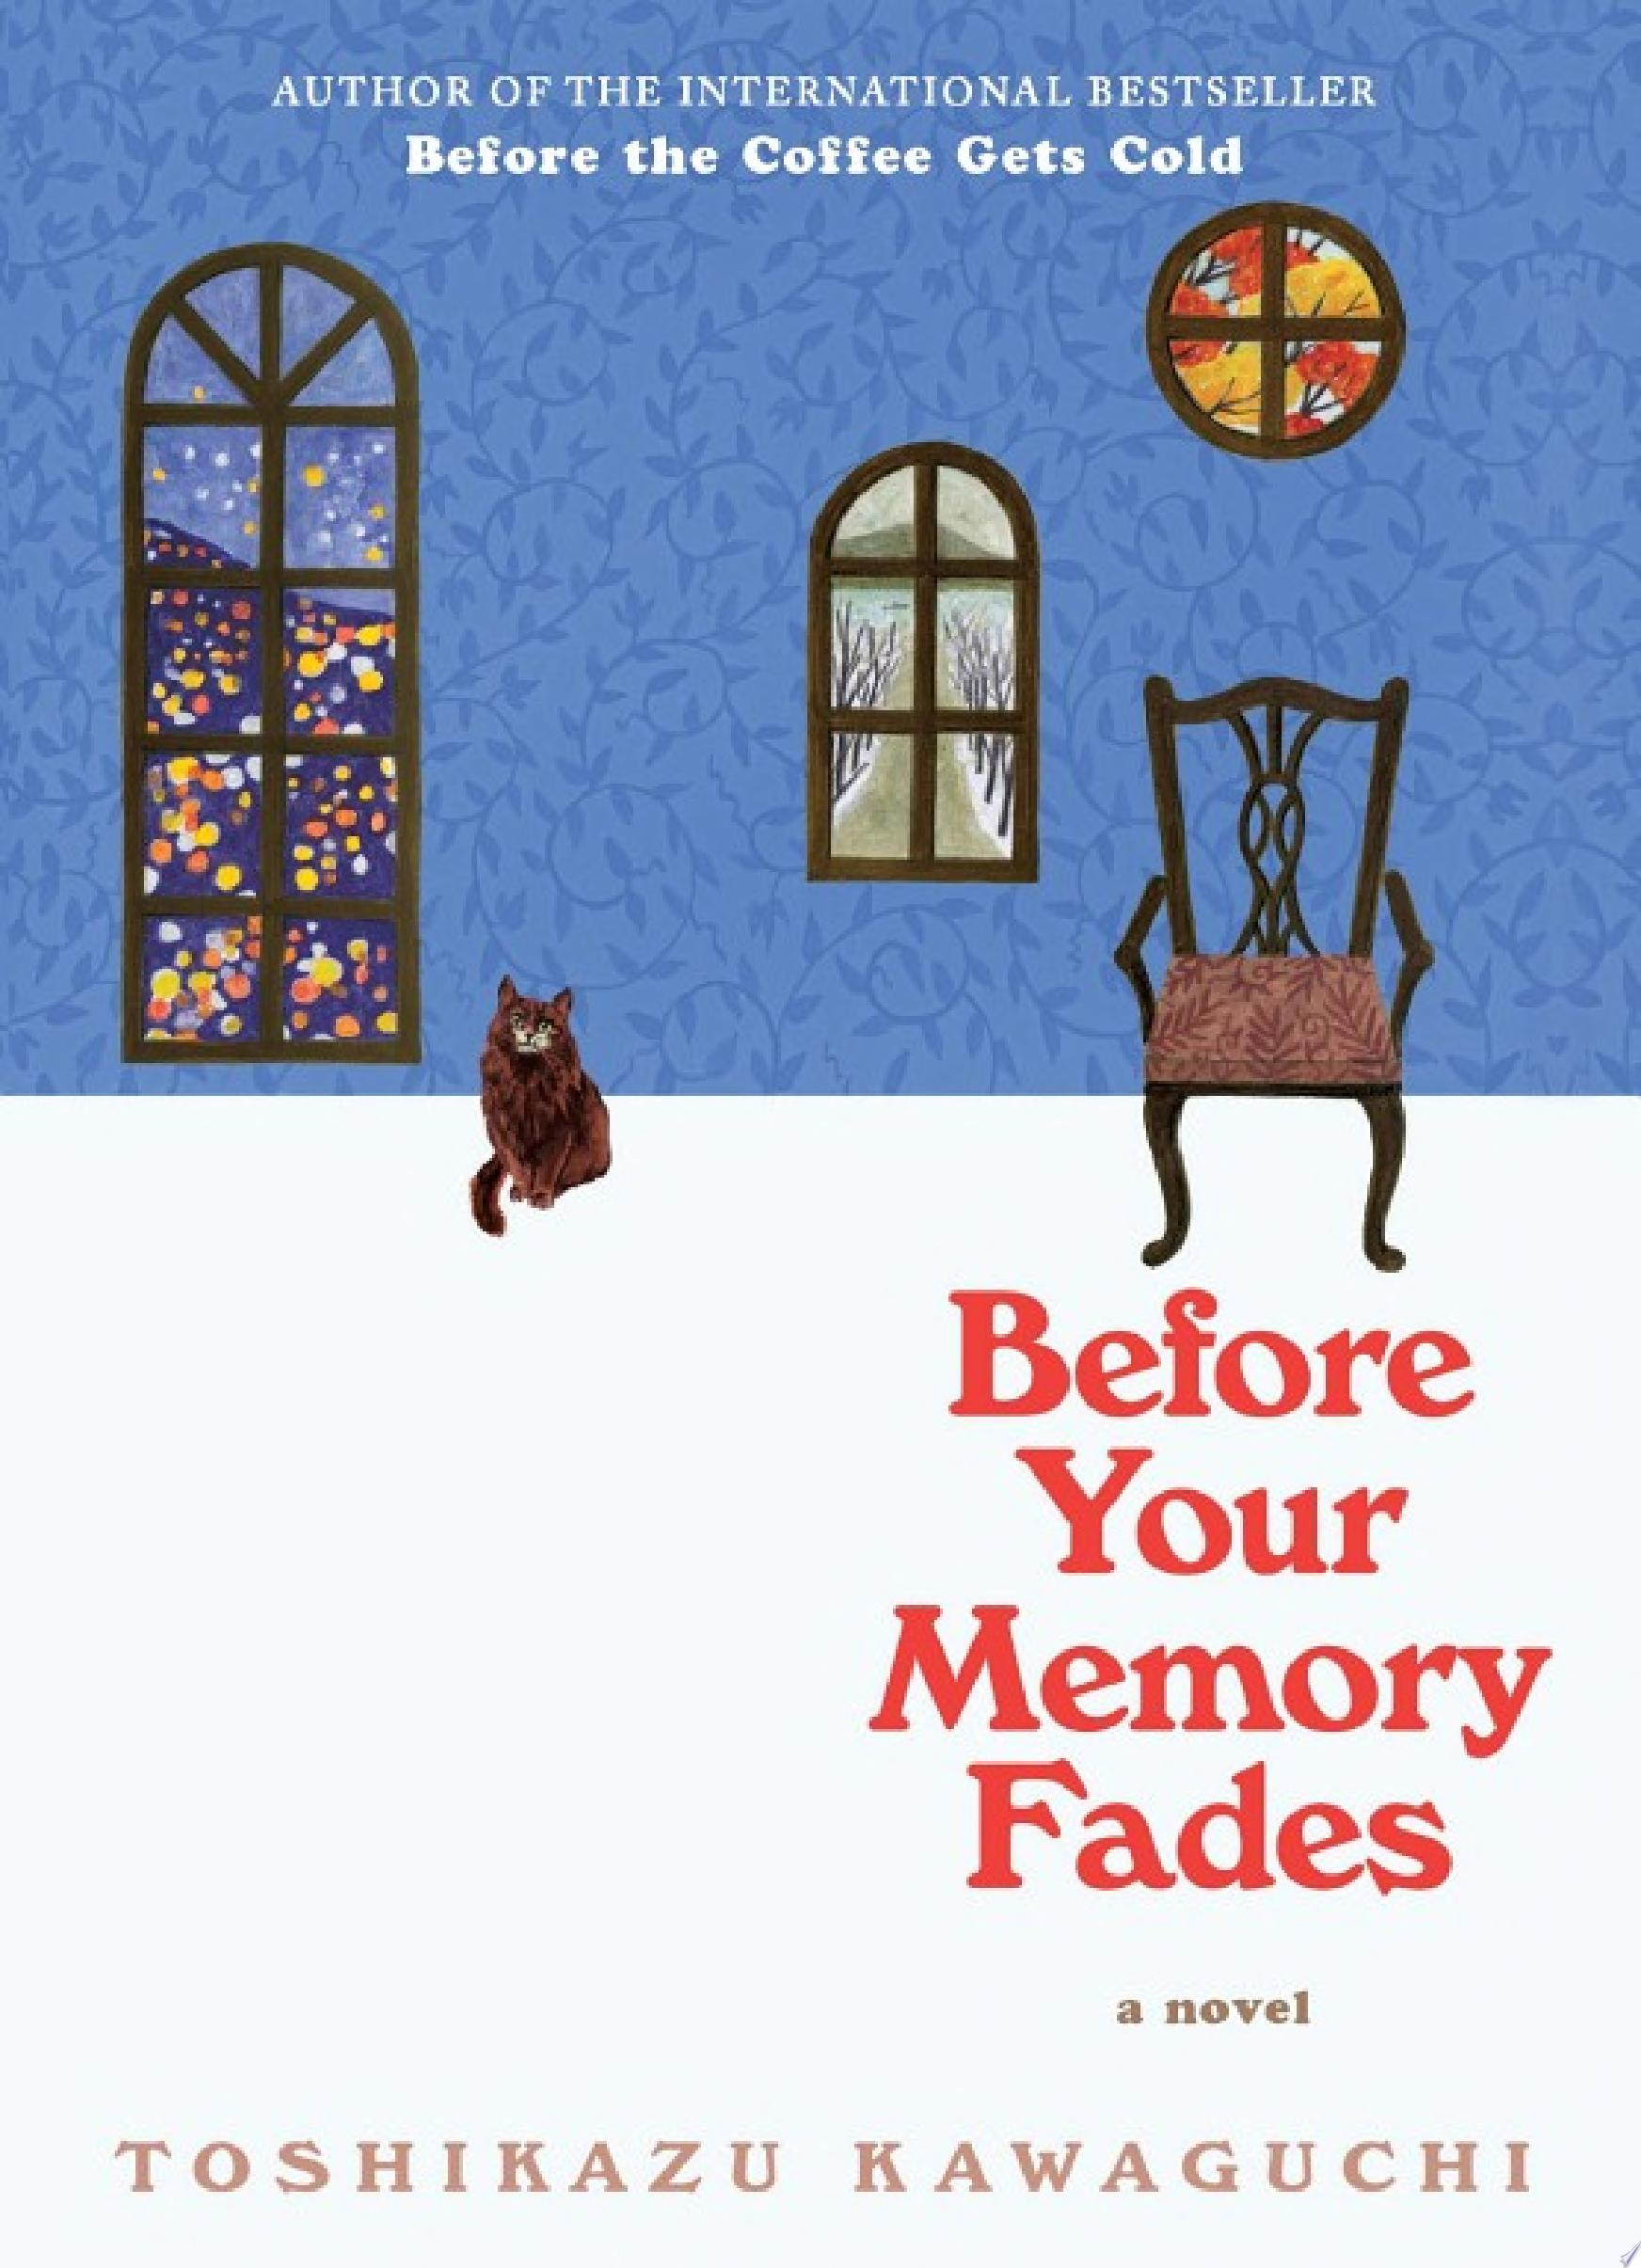 Image for "Before Your Memory Fades"